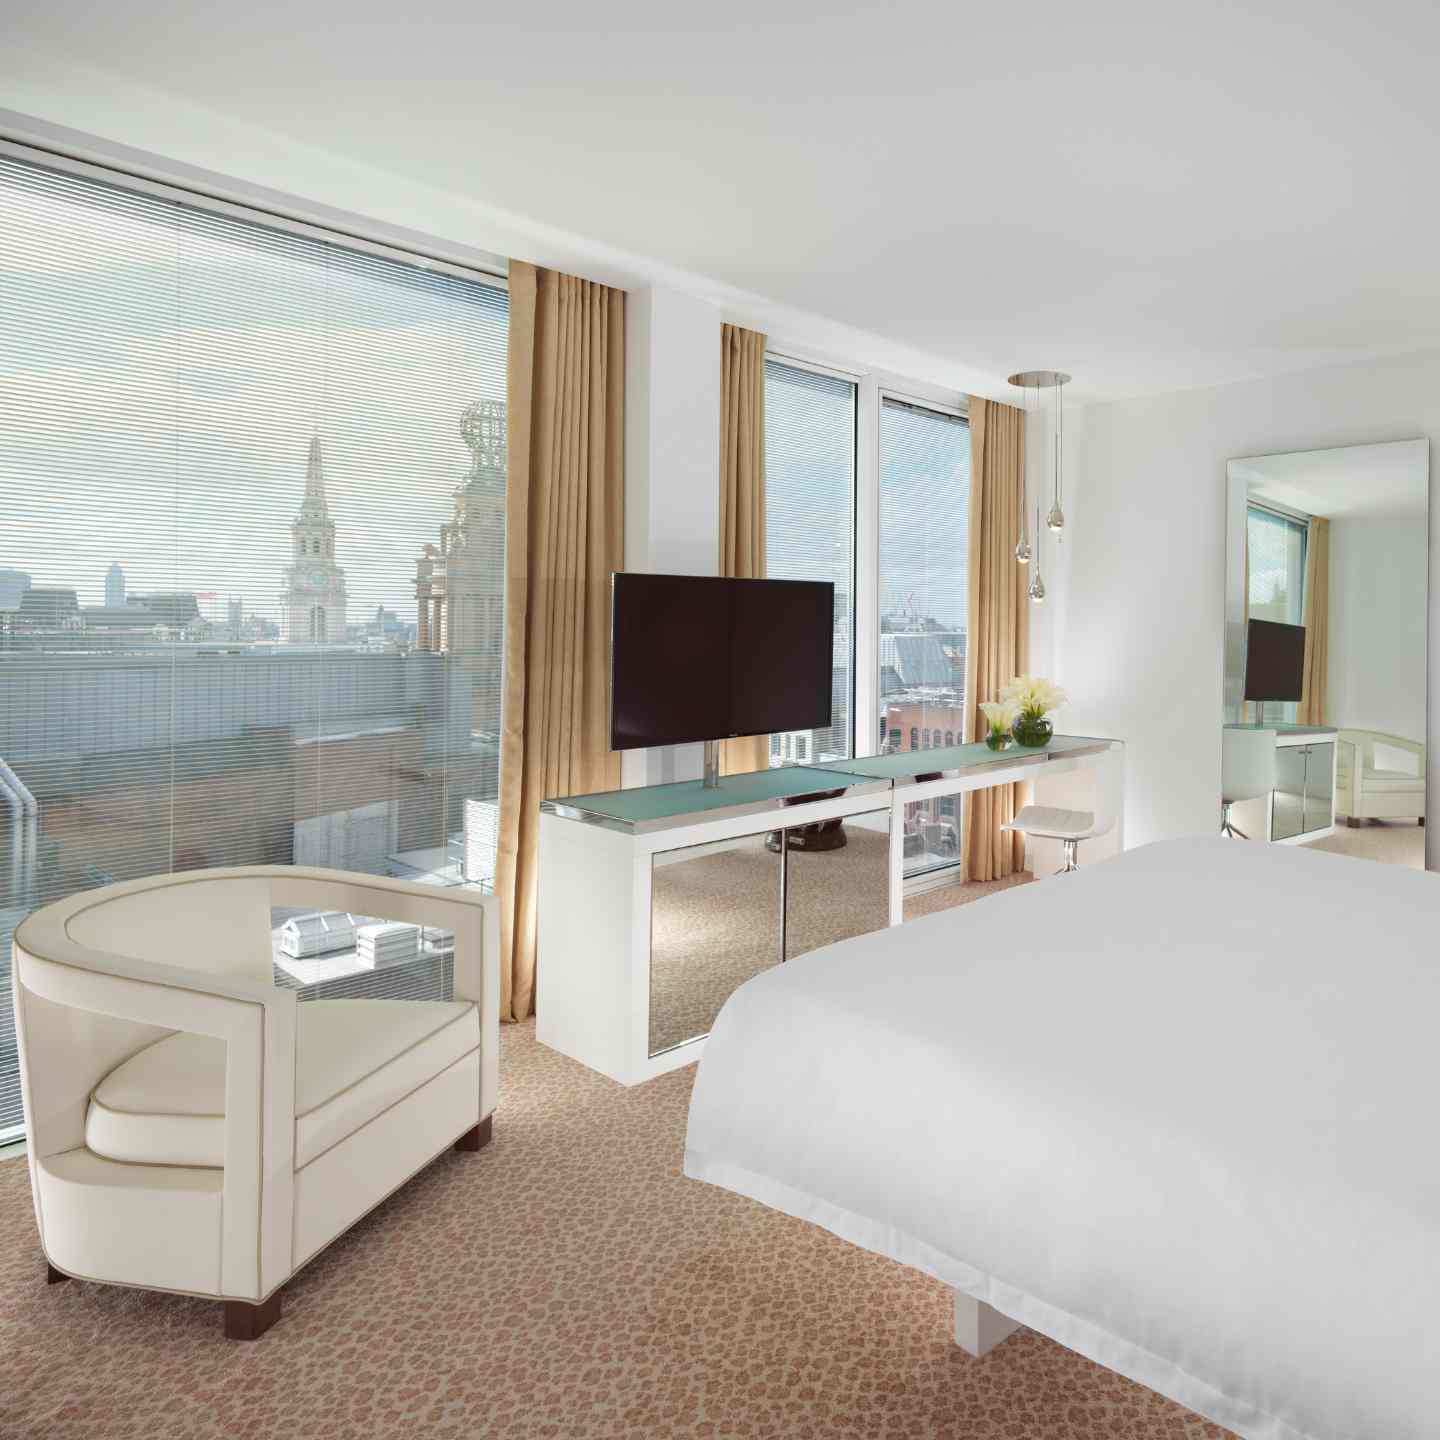 Hotel room with large white bed, white leather chair, white entertainment center with black TV, and floor-to-ceiling windows with views of London